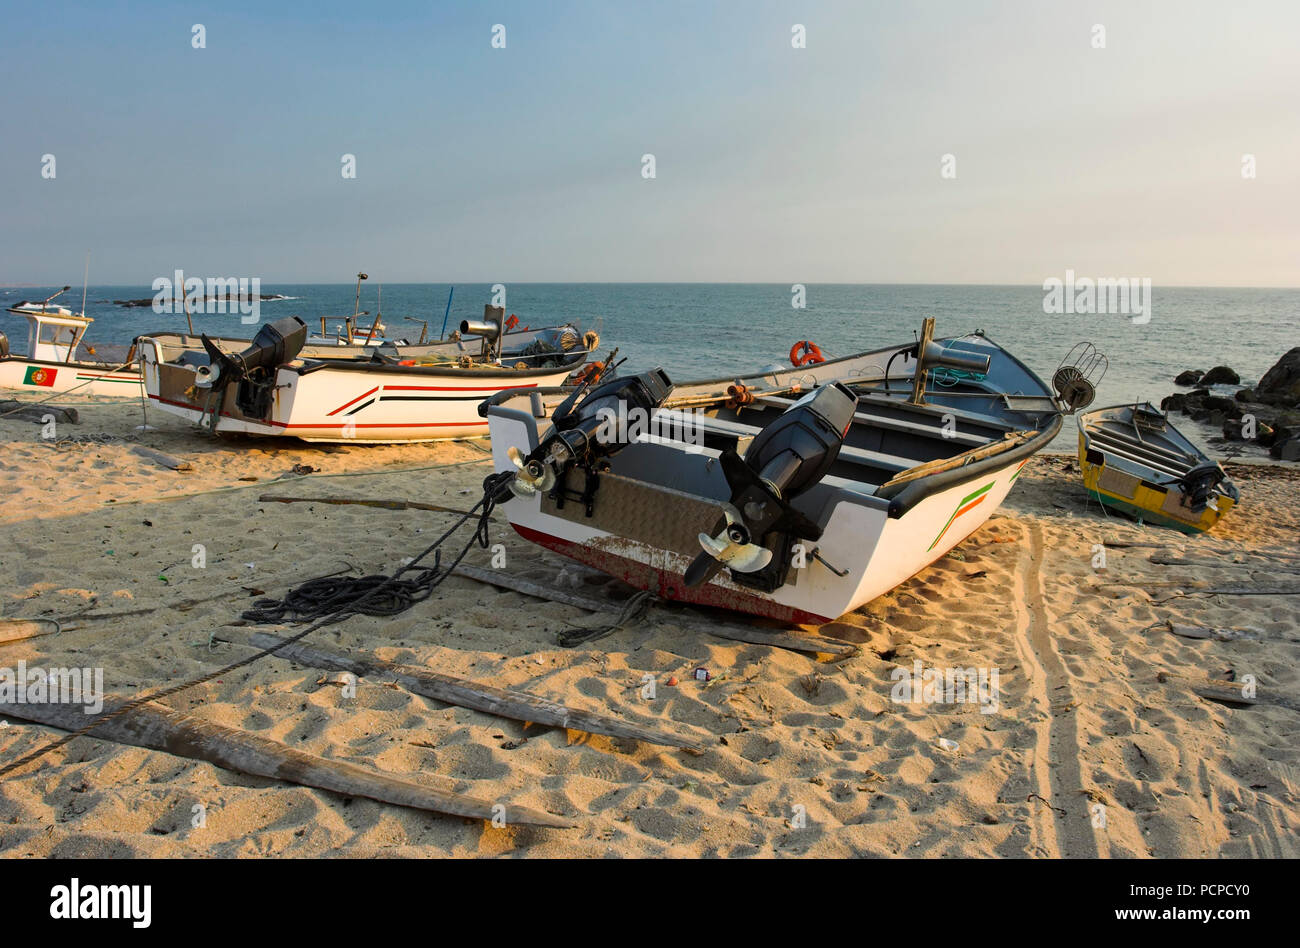 Fisherman boats in the beach (late evening light) Stock Photo